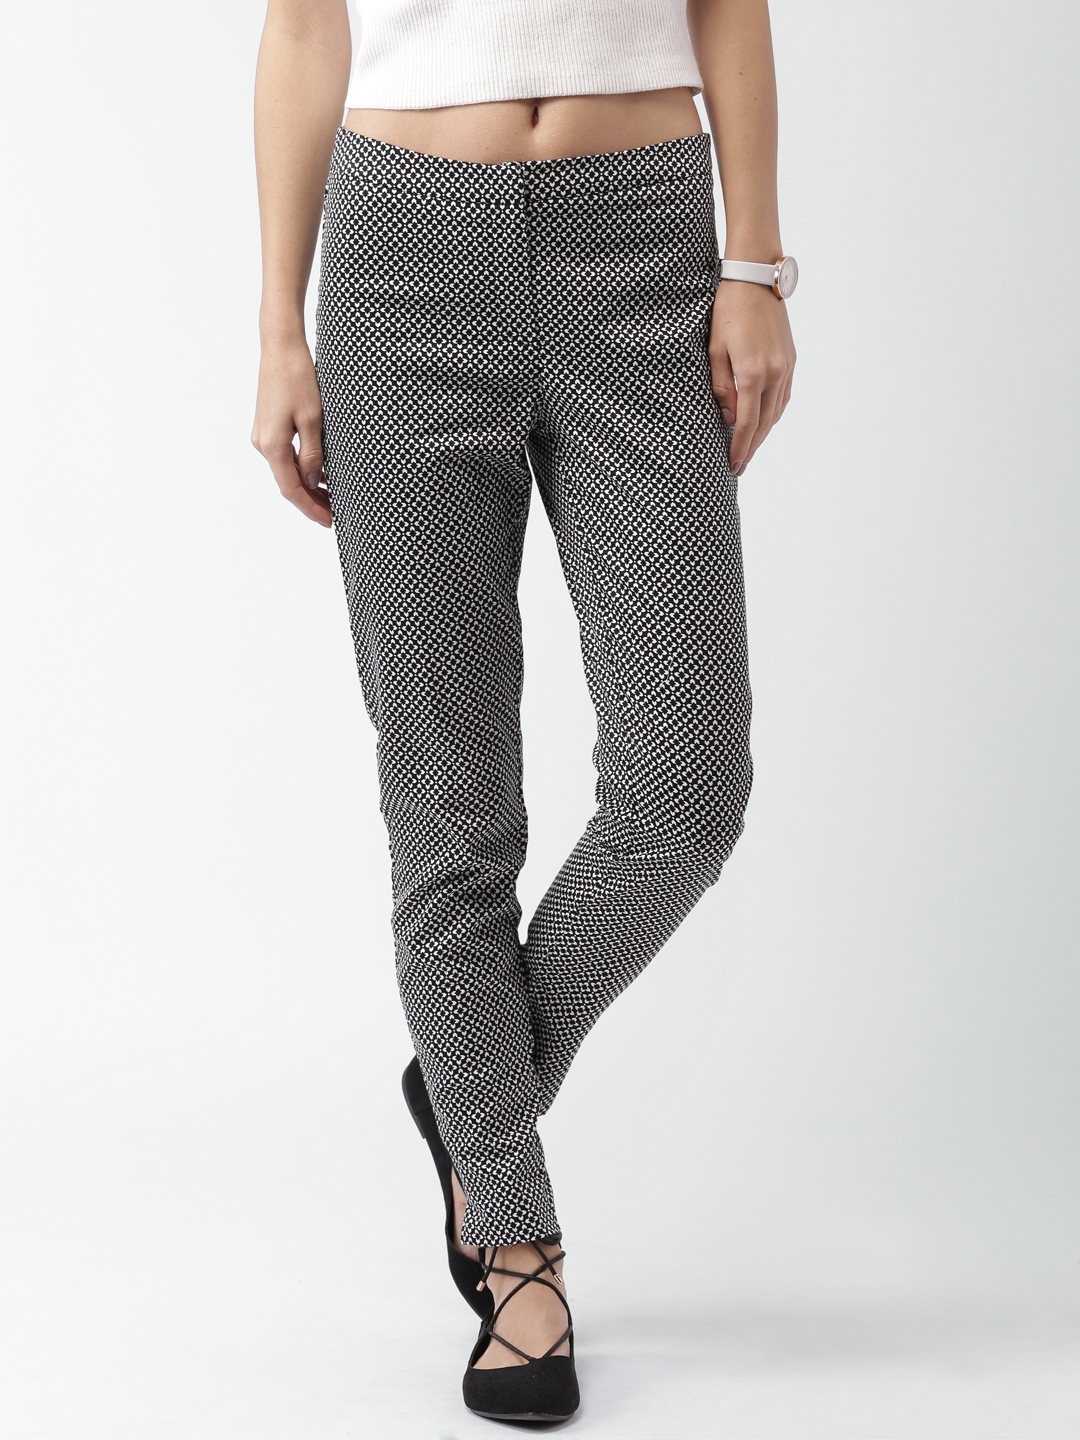 New Look Naples Black Slim Leg Womens Trousers  Stockpoint Apparel Outlet